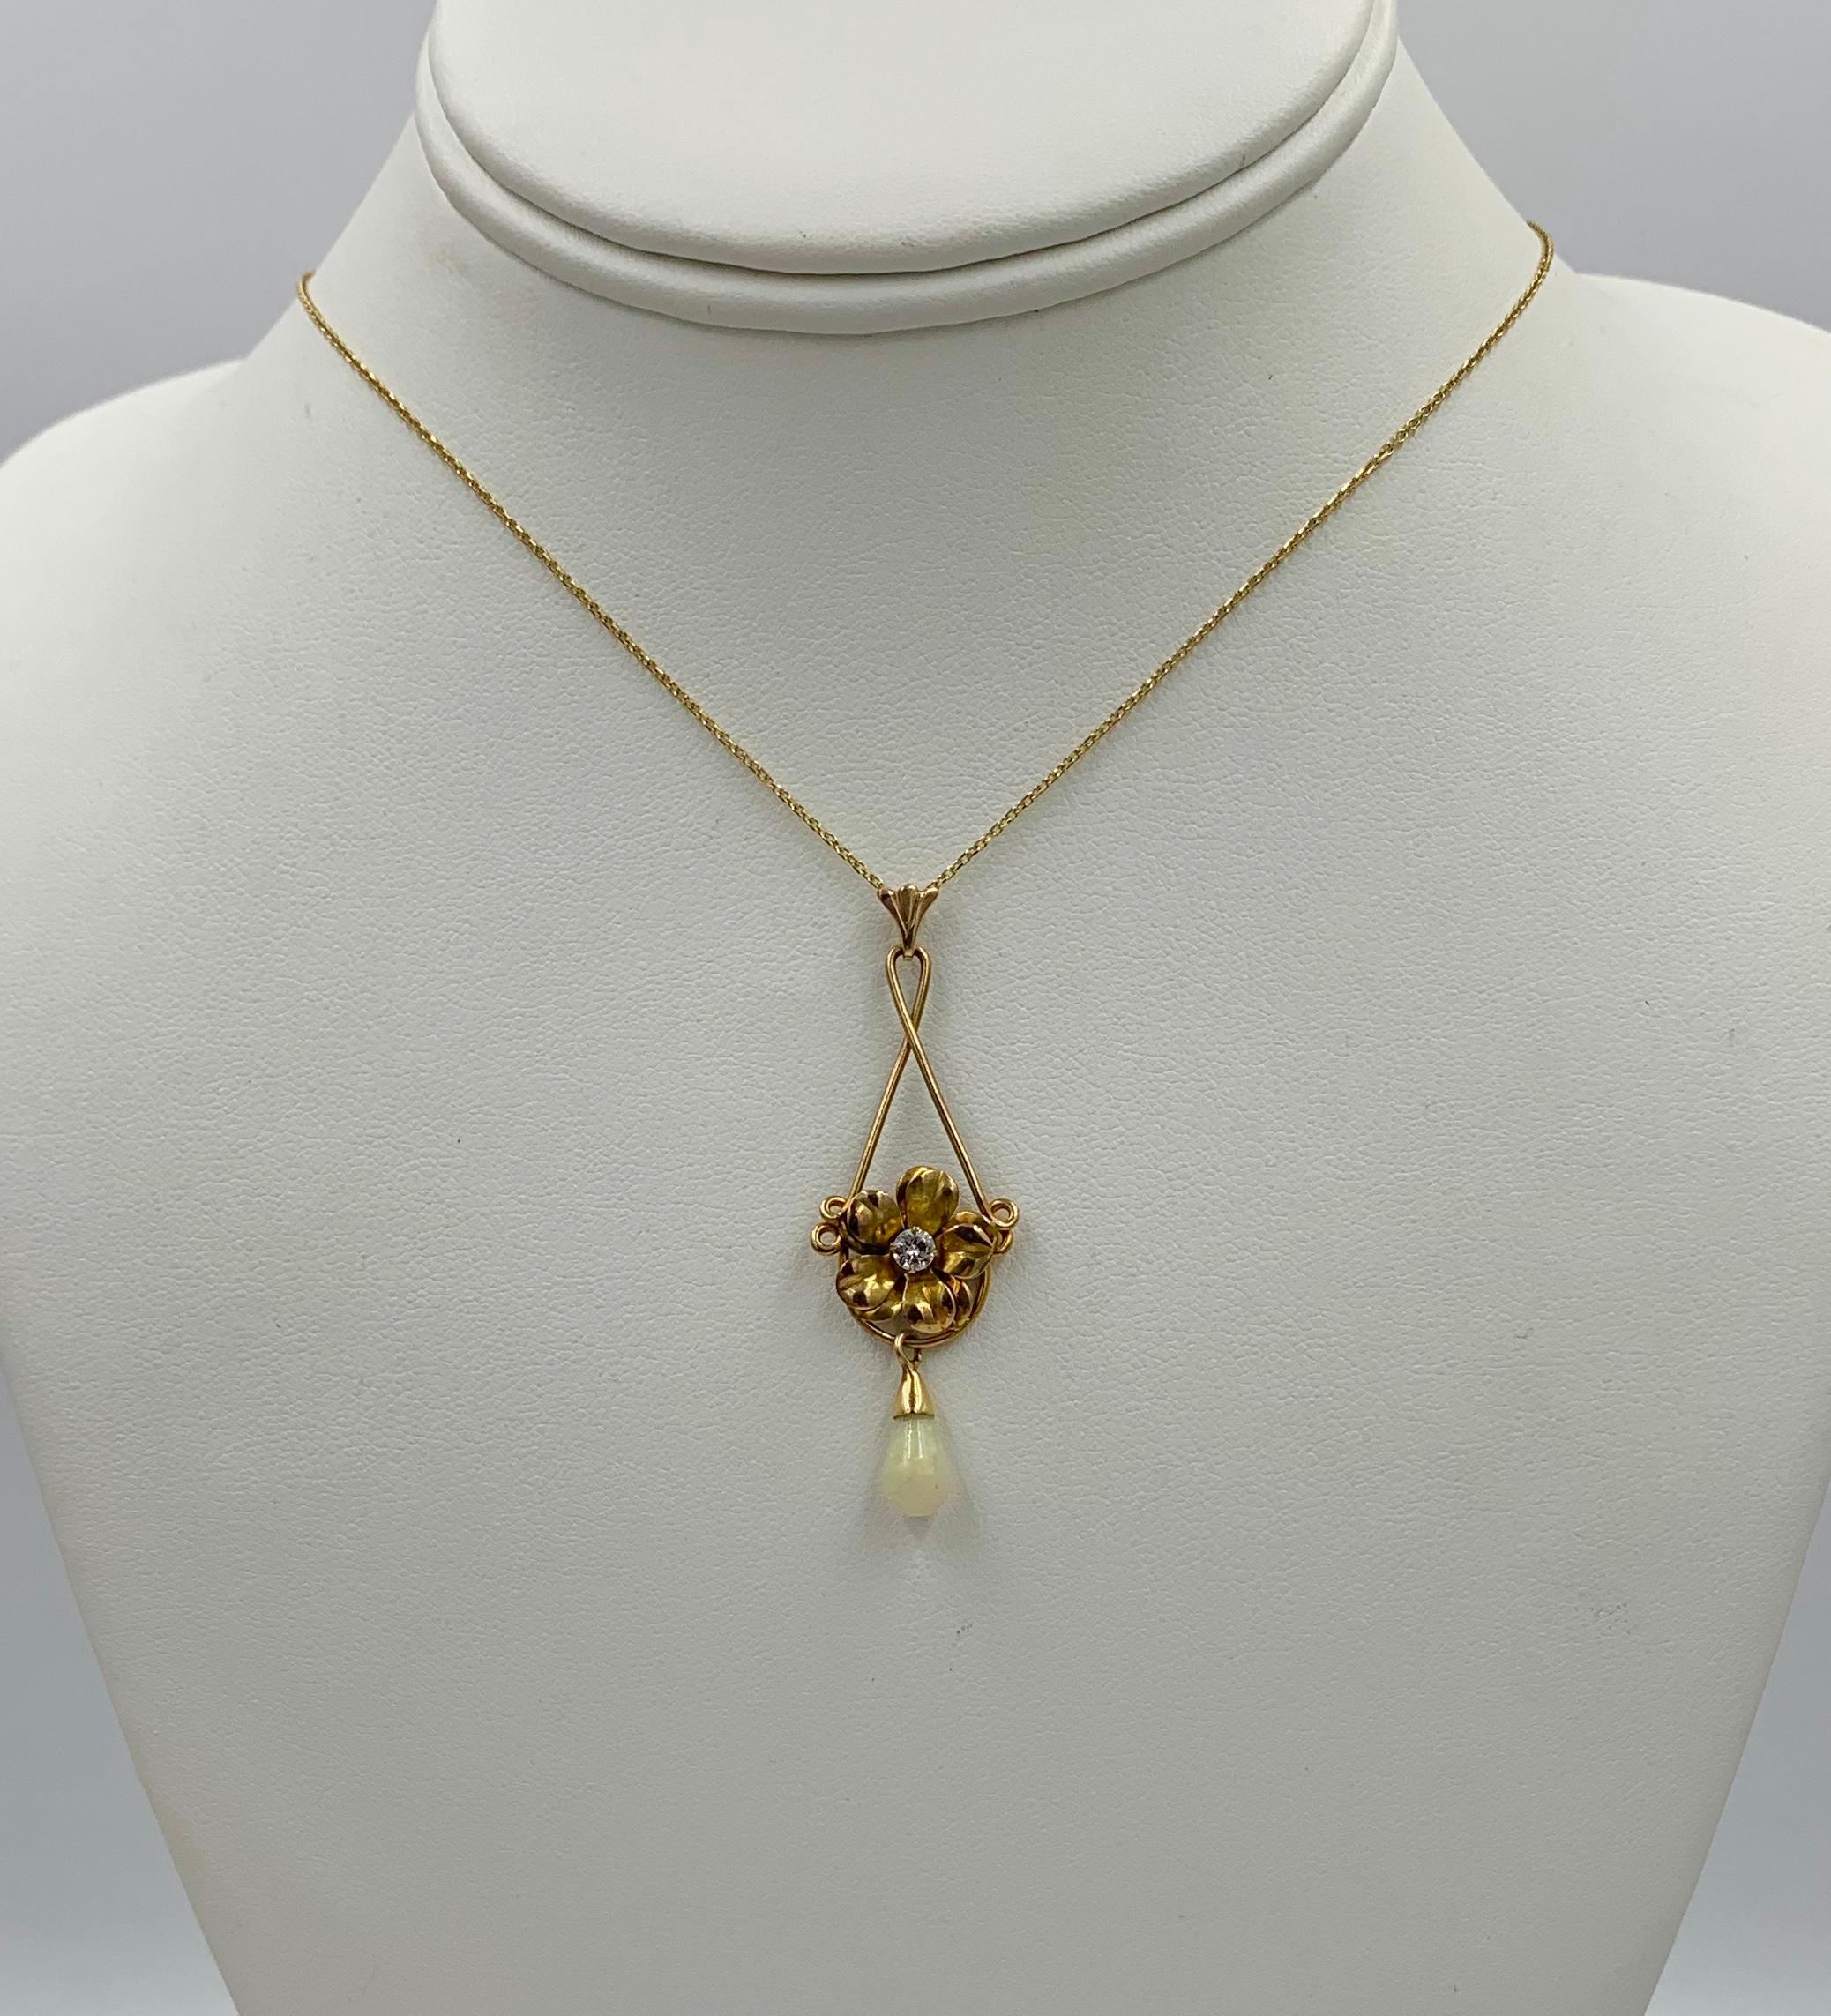 AN ART NOUVEAU PENDANT IN THE FORM OF A FLOWER SET WITH A SPARKLING ROUND DIAMOND IN THE CENTER OF THE FLOWER WITH A PEAR SHAPED OPAL HANGING PENDANT ALL IN 14 KARAT GOLD. THE  WONDERFUL THREE DIMENSIONAL DEPICTION OF THE FLOWER, WHICH MAY BE A